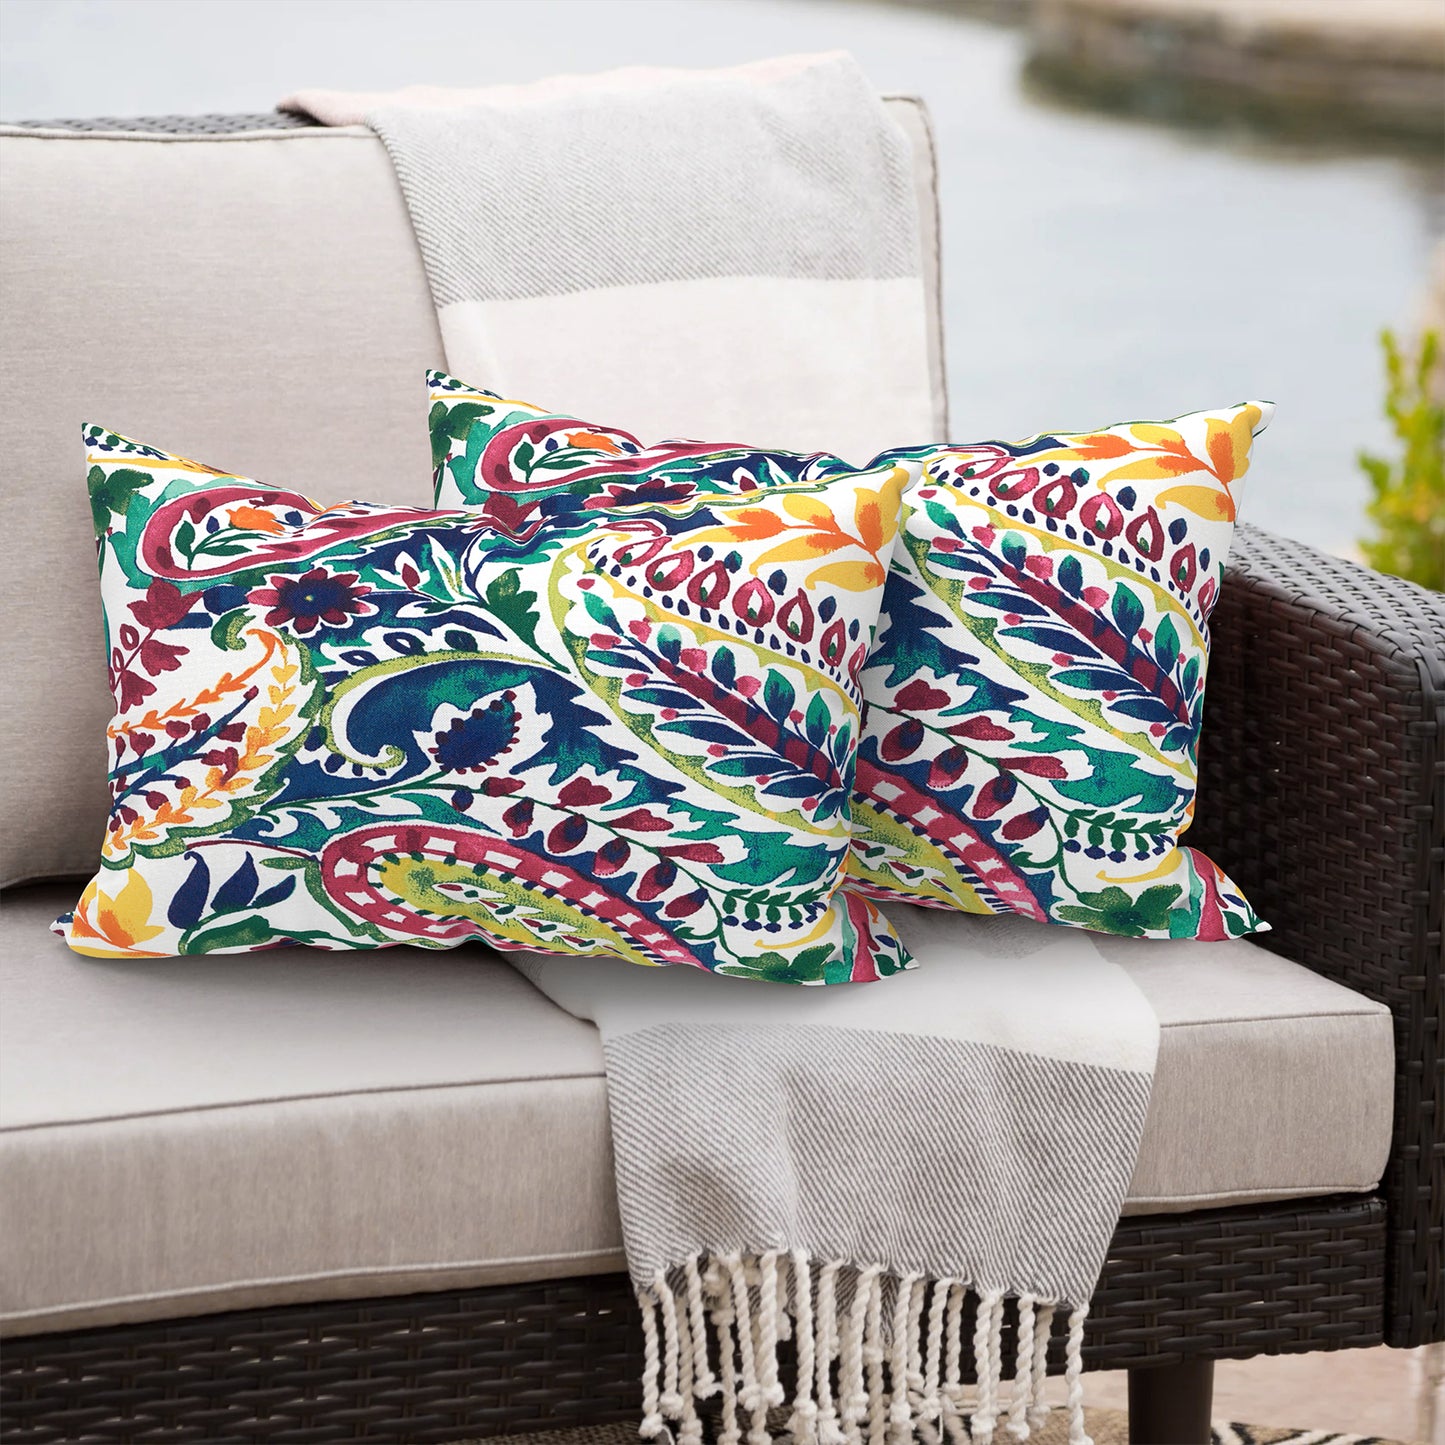 Melody Elephant Outdoor/Indoor Lumbar Pillows, Water Repellent Cushion Pillows, 12x20 Inch, Outdoor Pillows with Inserts for Home Garden, Pack of 2, Vigour Paisley